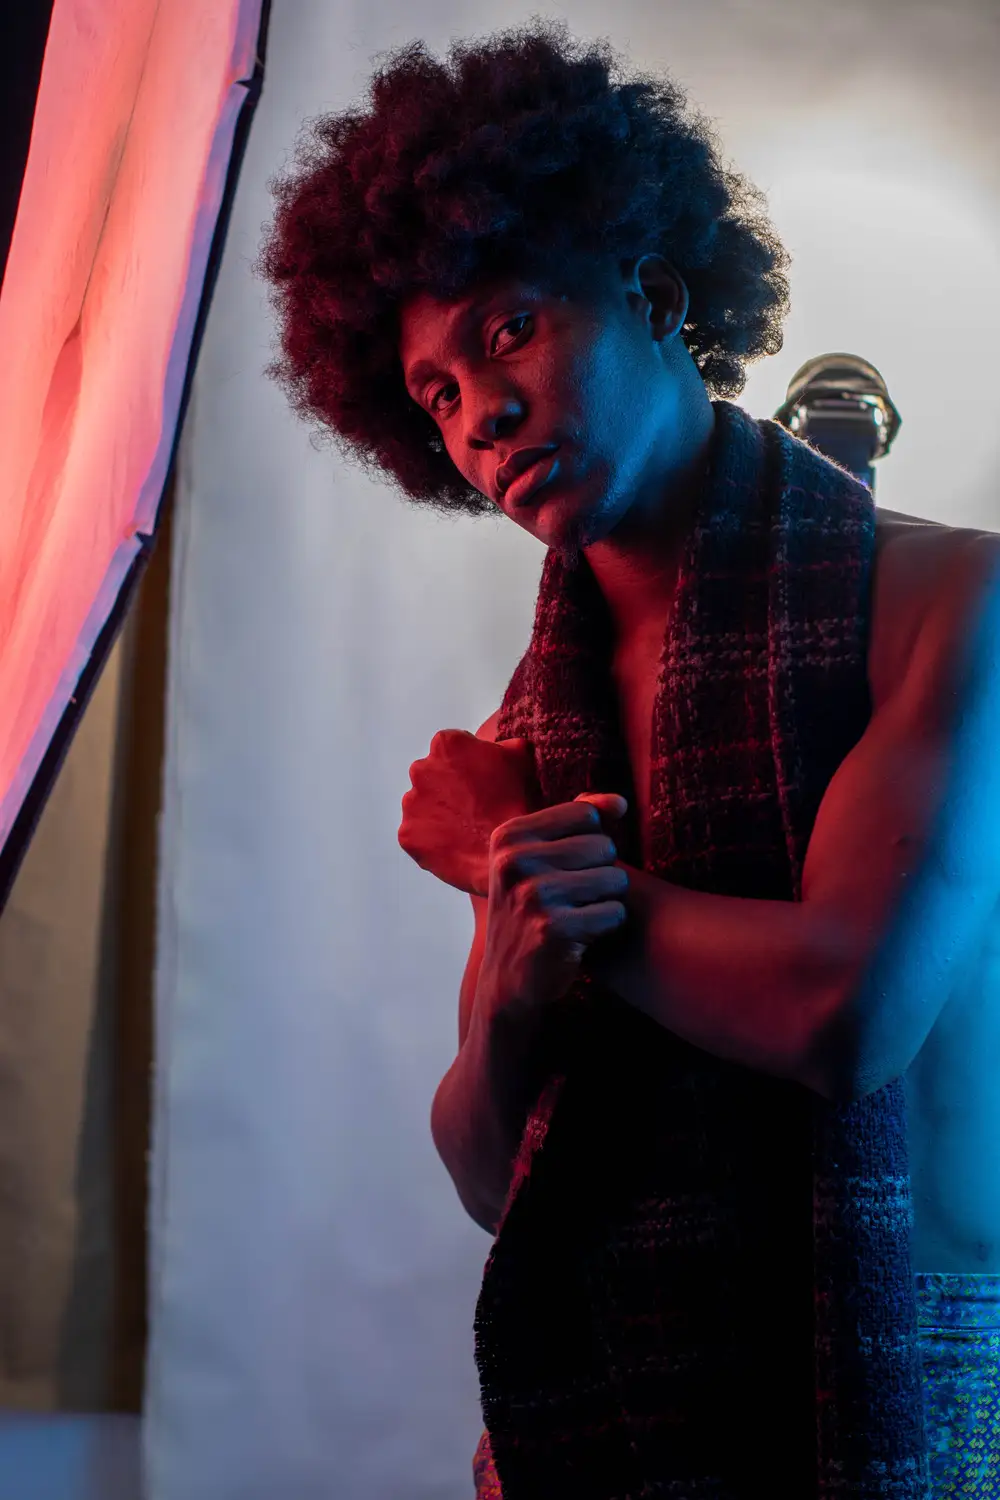 model on afro hairstyle crosses his hands